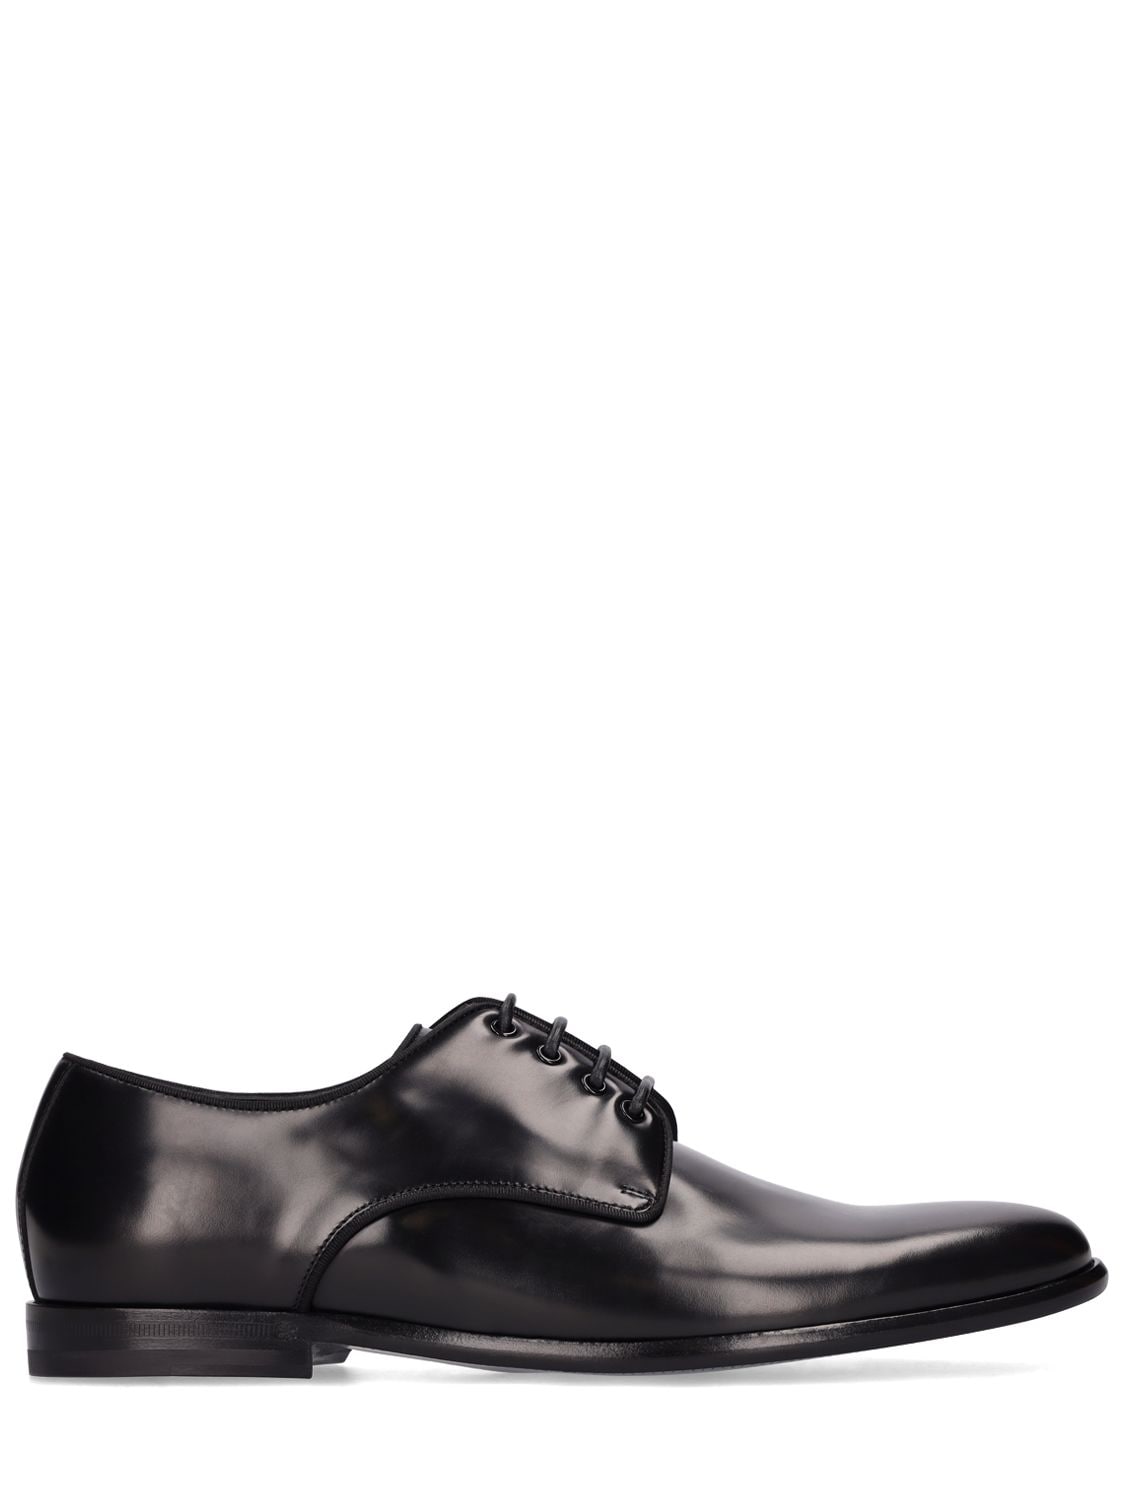 Dolce & Gabbana Antik Leather Derby Shoes In Black